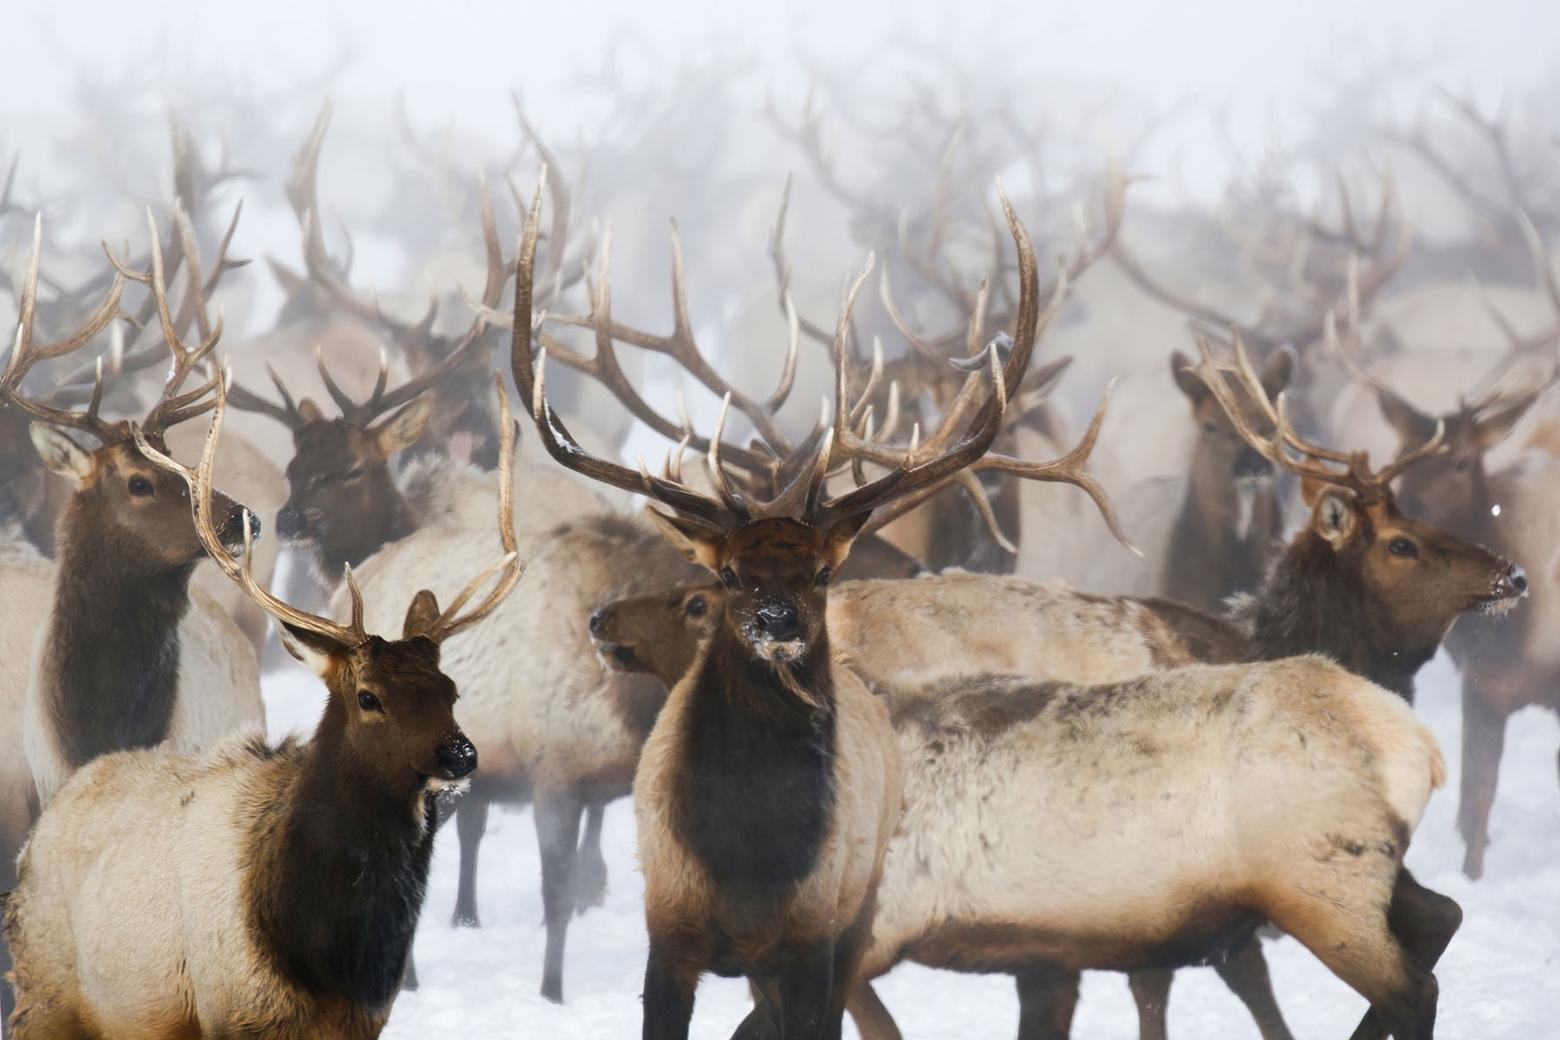 USGS found that closing feedgrounds in western Wyoming would likely cause a significant dropoff in regional elk numbers. But the elk would benefit in the long-term by avoiding mortality caused by CWD. Photo by Mark Goeke, WGFD